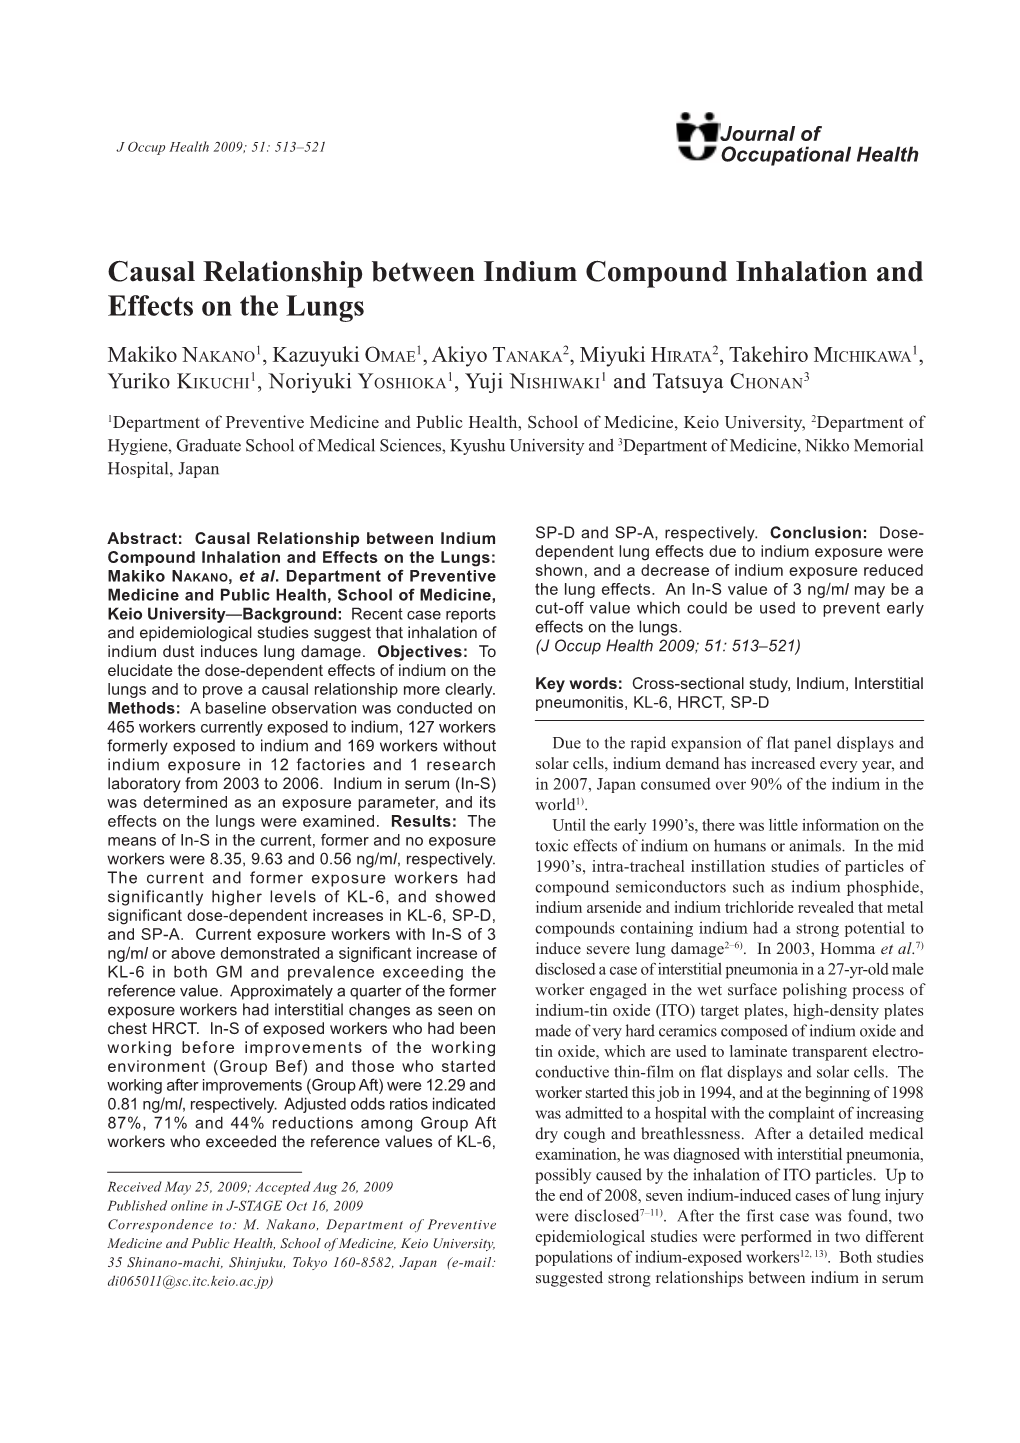 Causal Relationship Between Indium Compound Inhalation and Effects on the Lungs